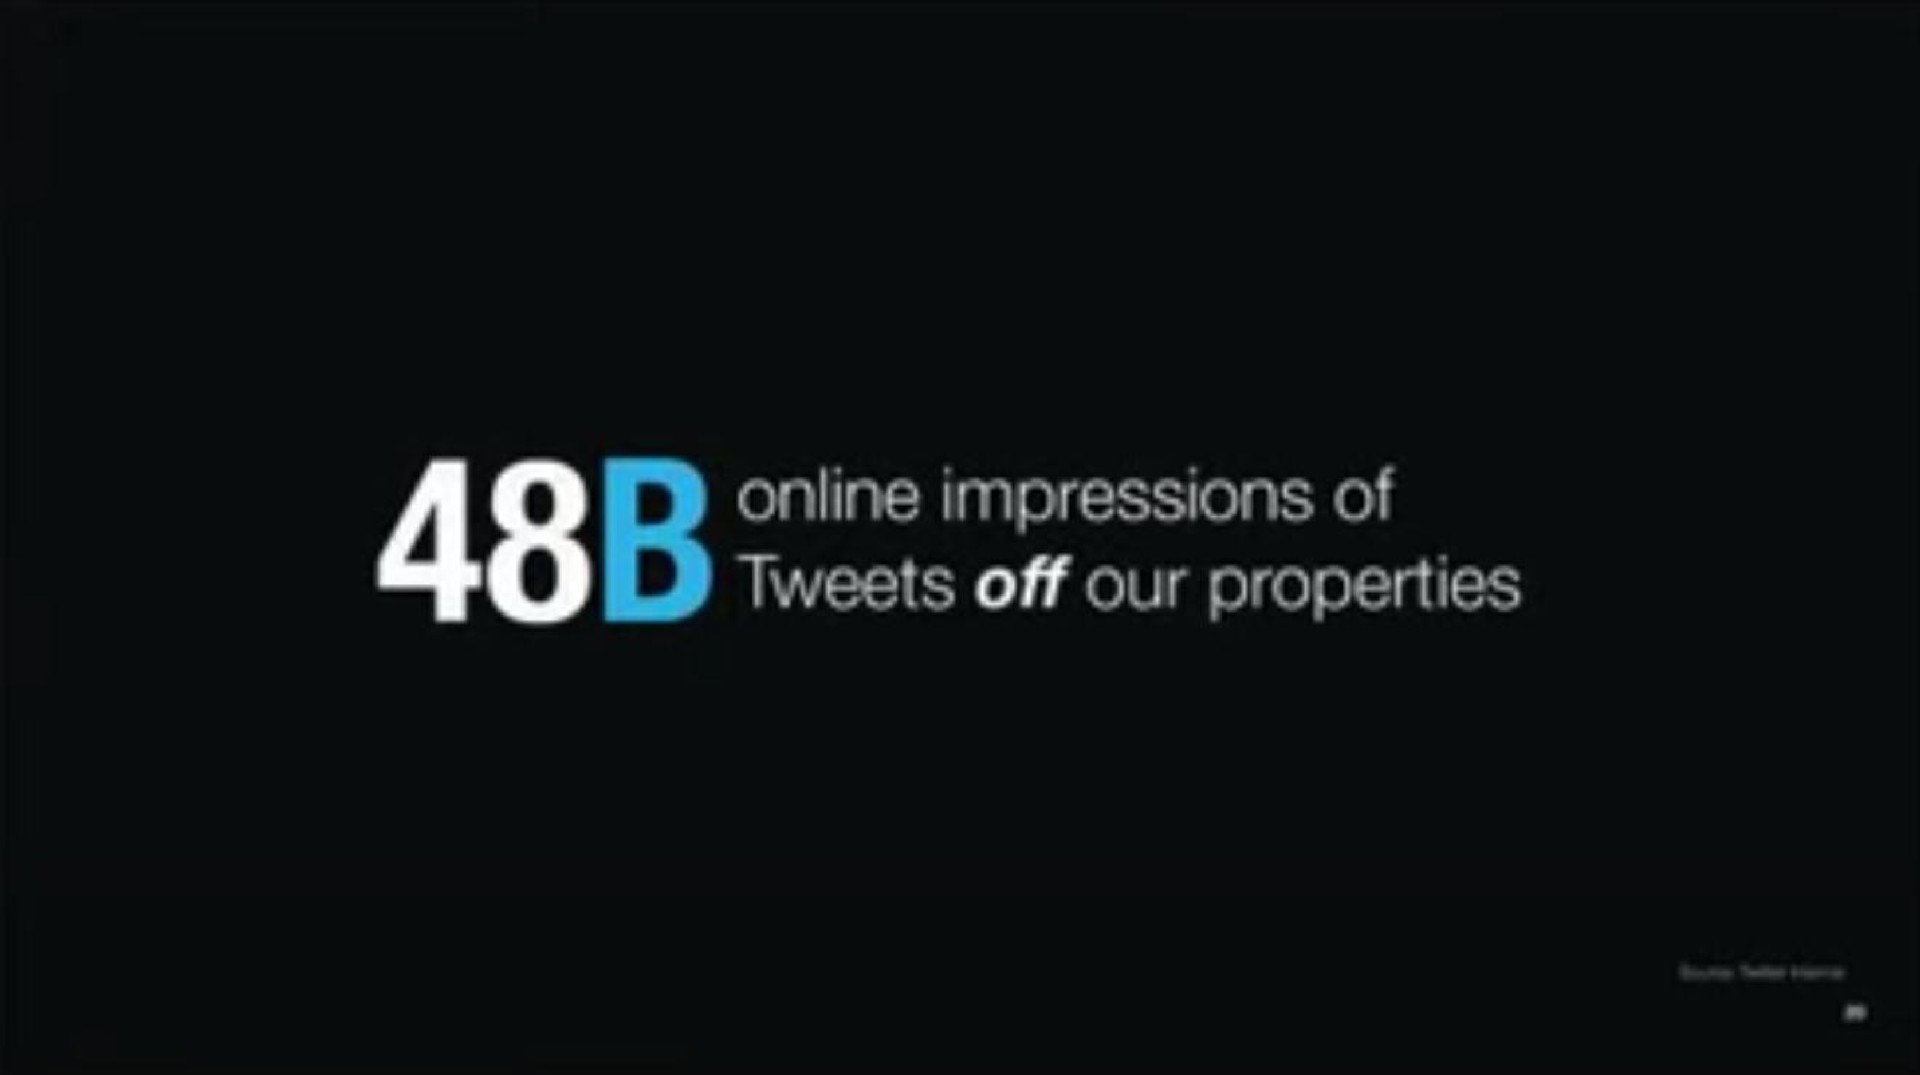 impressions of tweets off our properties | Twitter